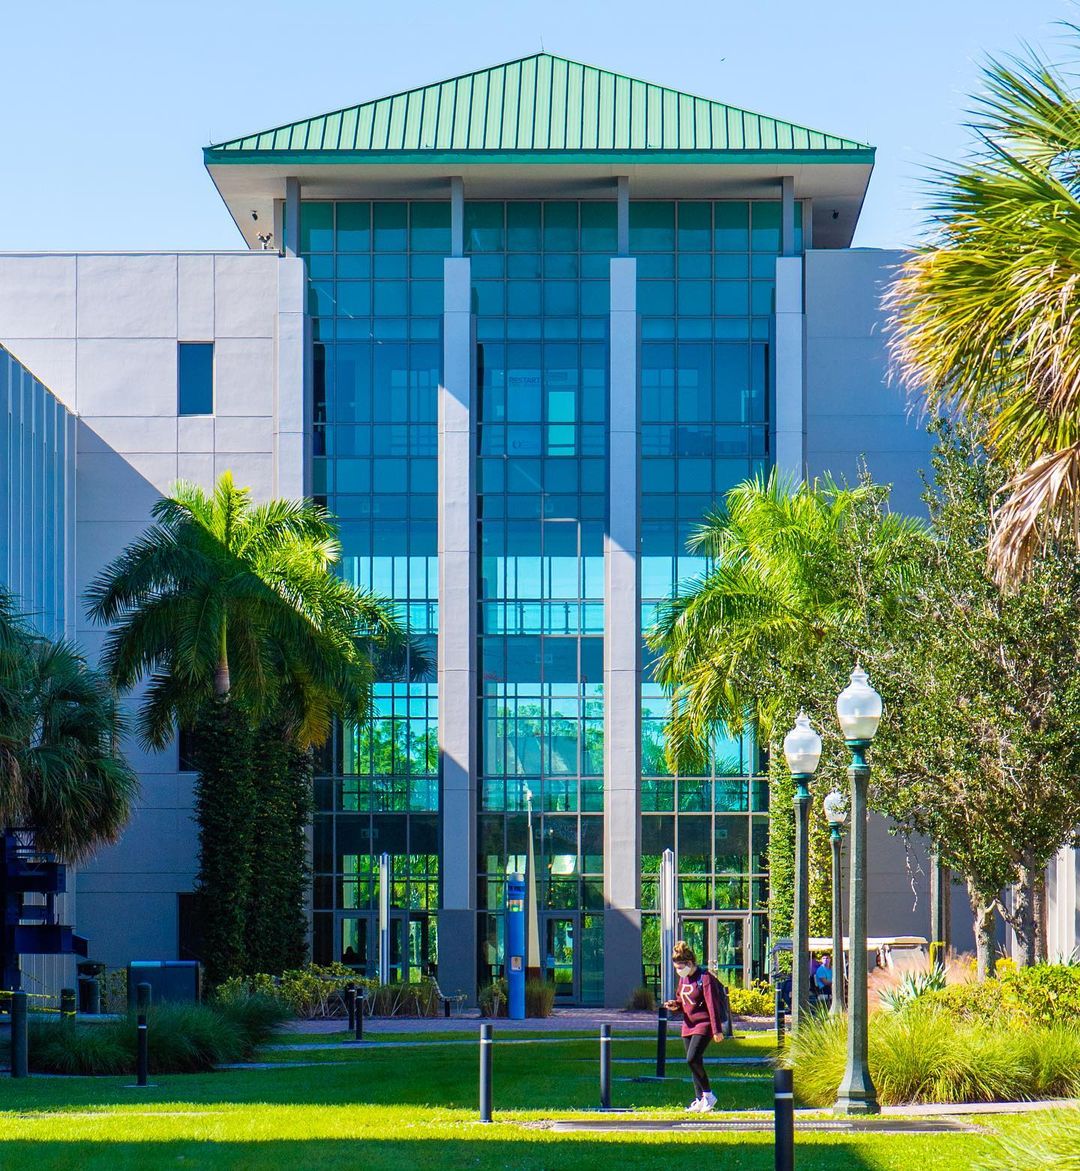 Exterior Photo of Florida Gulf Coast University in Fort Myers, FL. Photo by Instagram user @fgcu